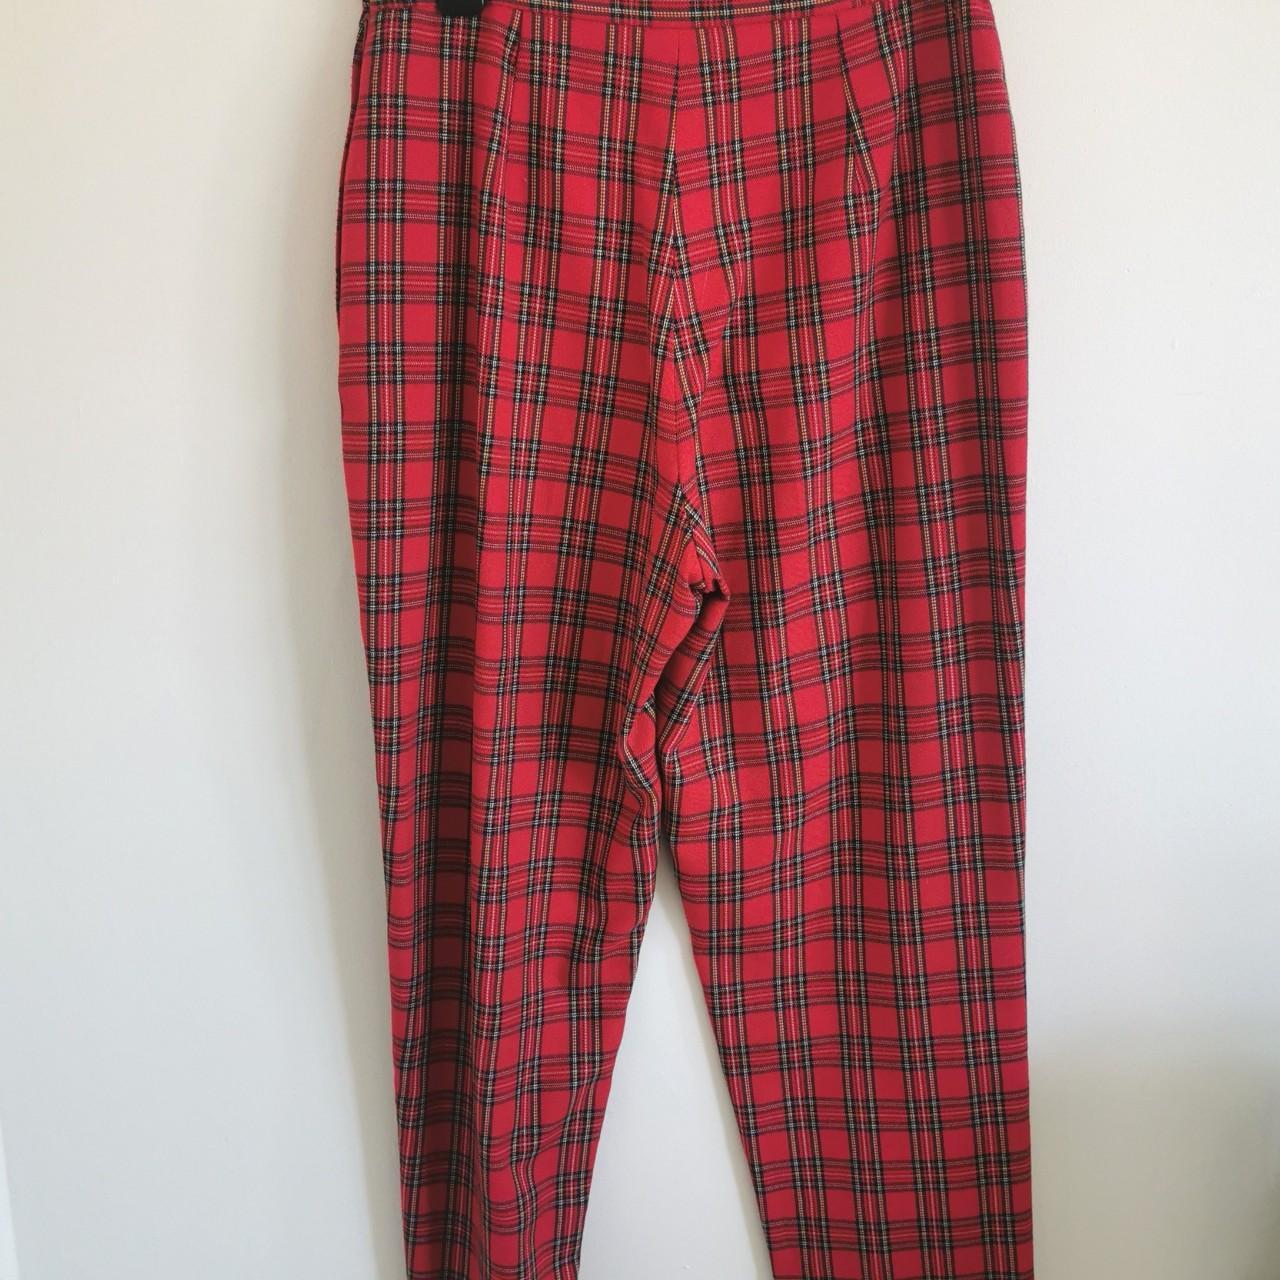 Rebecca Sheldon for New Look Vintage Red check... - Depop